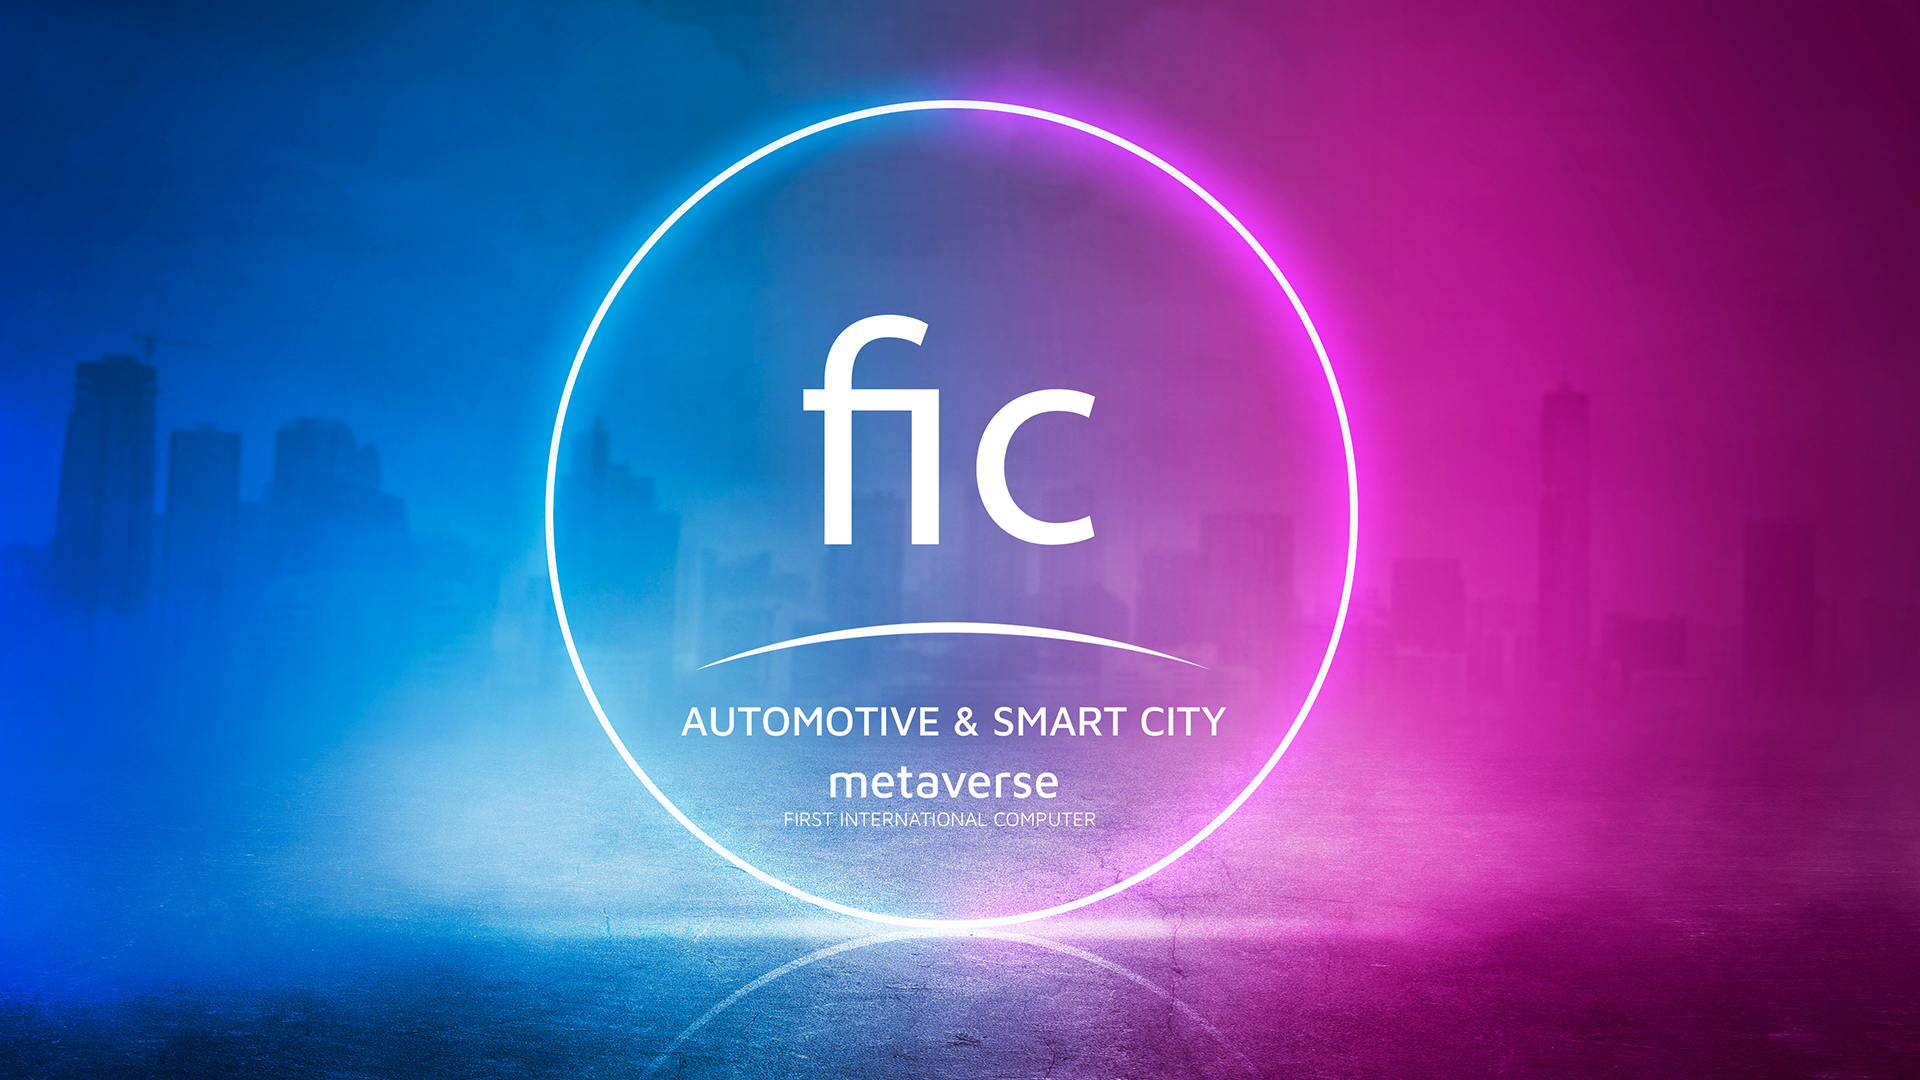 FIC will focus on the metaverse cloud business related to cars and smart city in the future